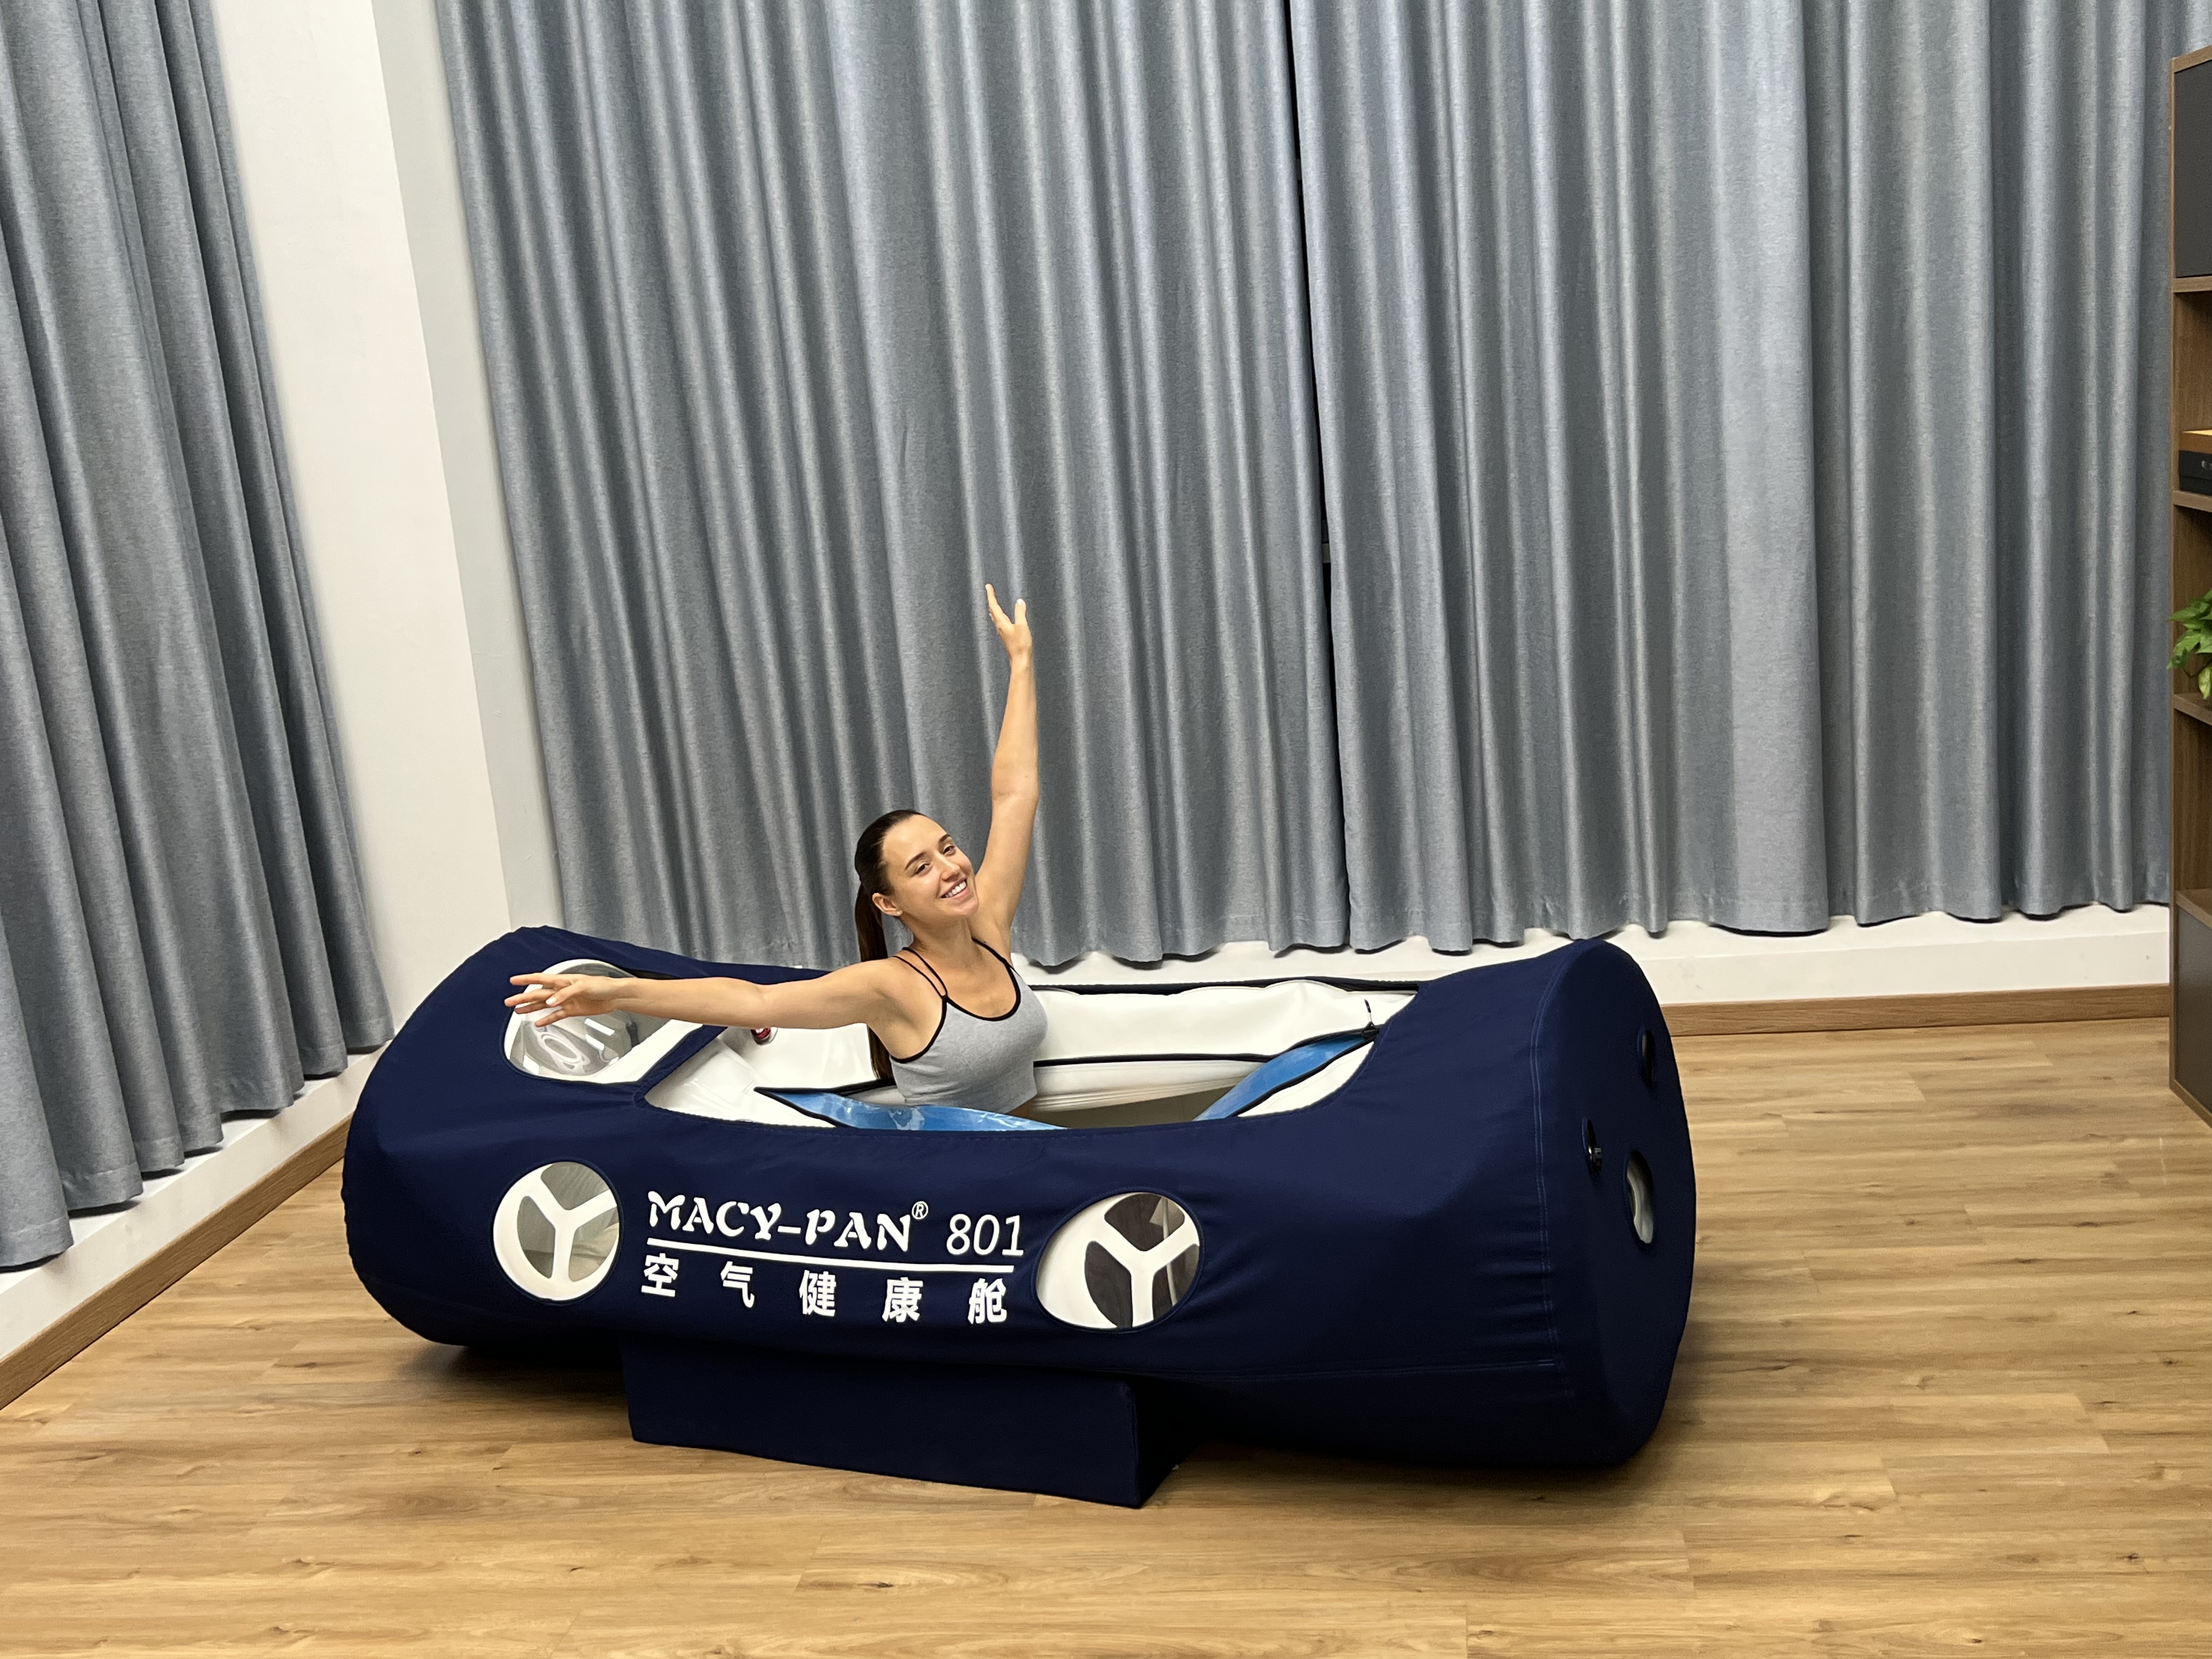 What Can You Do in a Hyperbaric Oxygen Chamber?